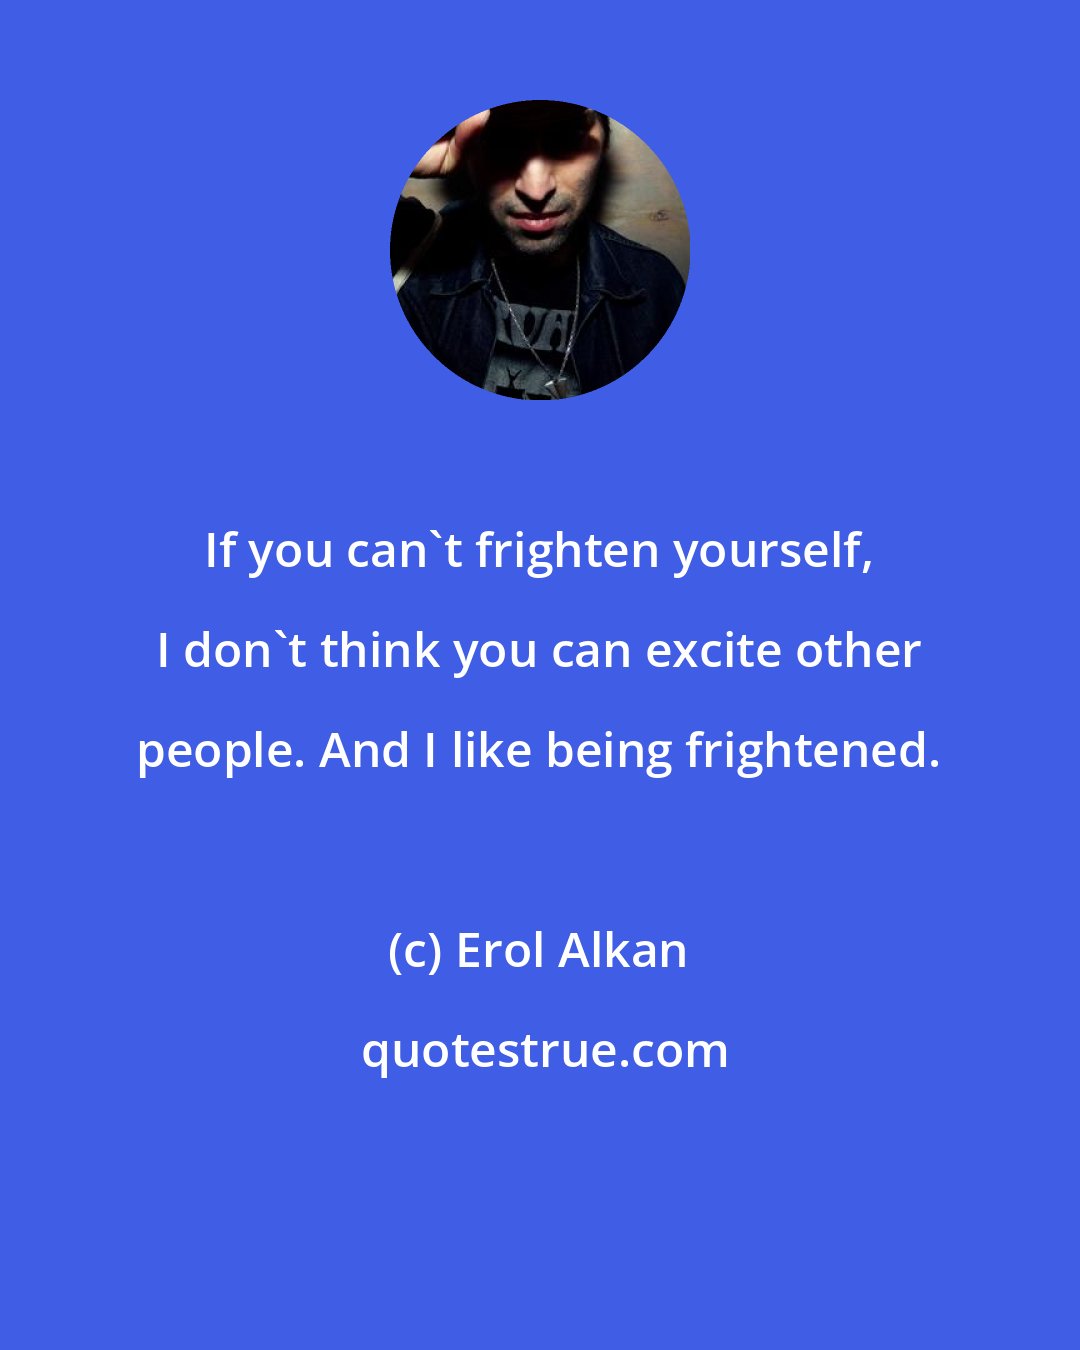 Erol Alkan: If you can't frighten yourself, I don't think you can excite other people. And I like being frightened.